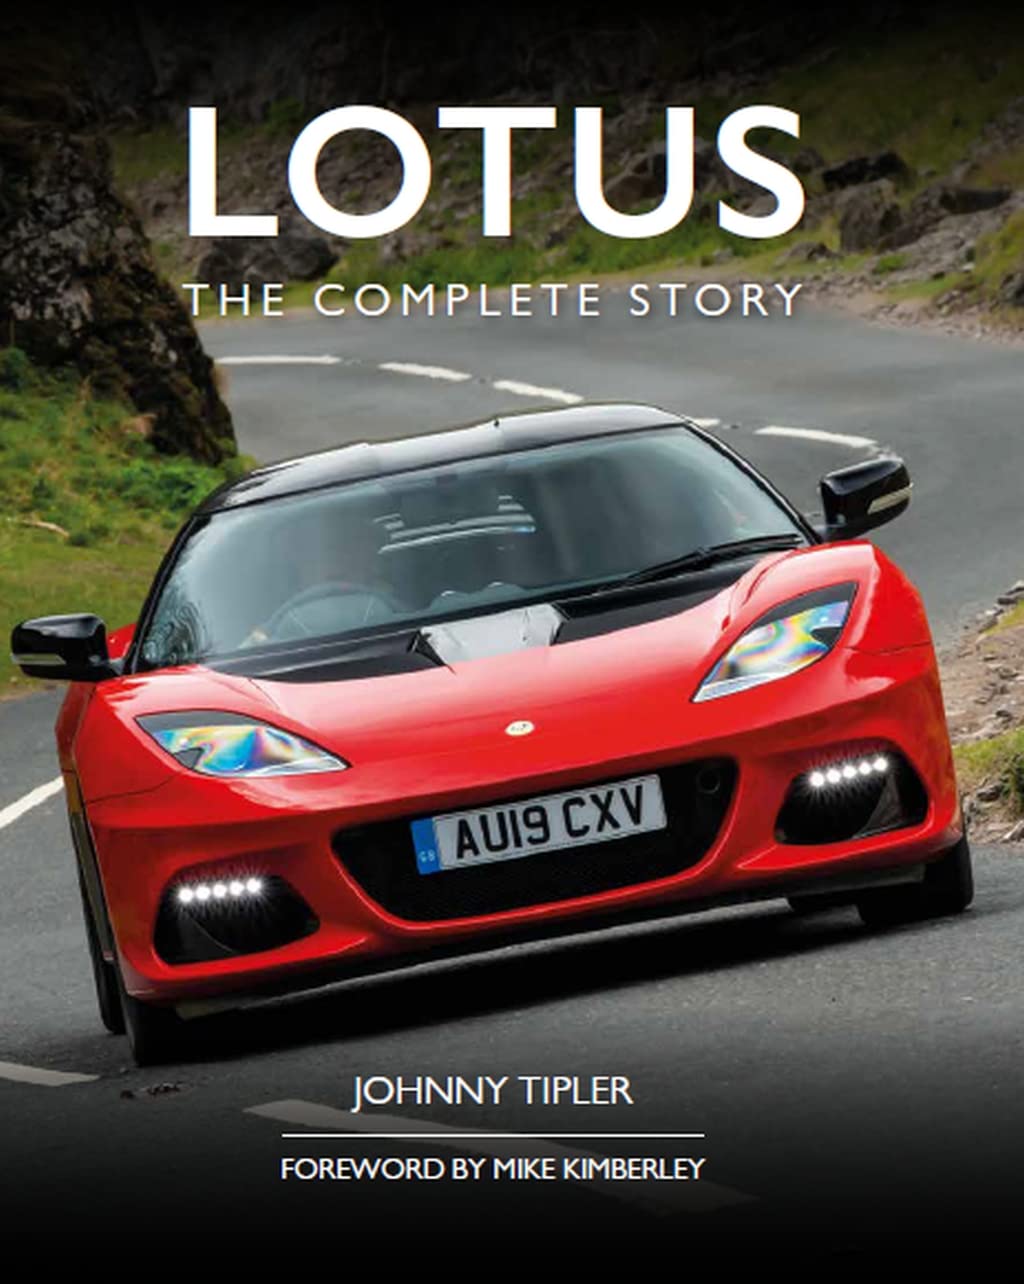 LOTUS : THE COMPLETE STORY